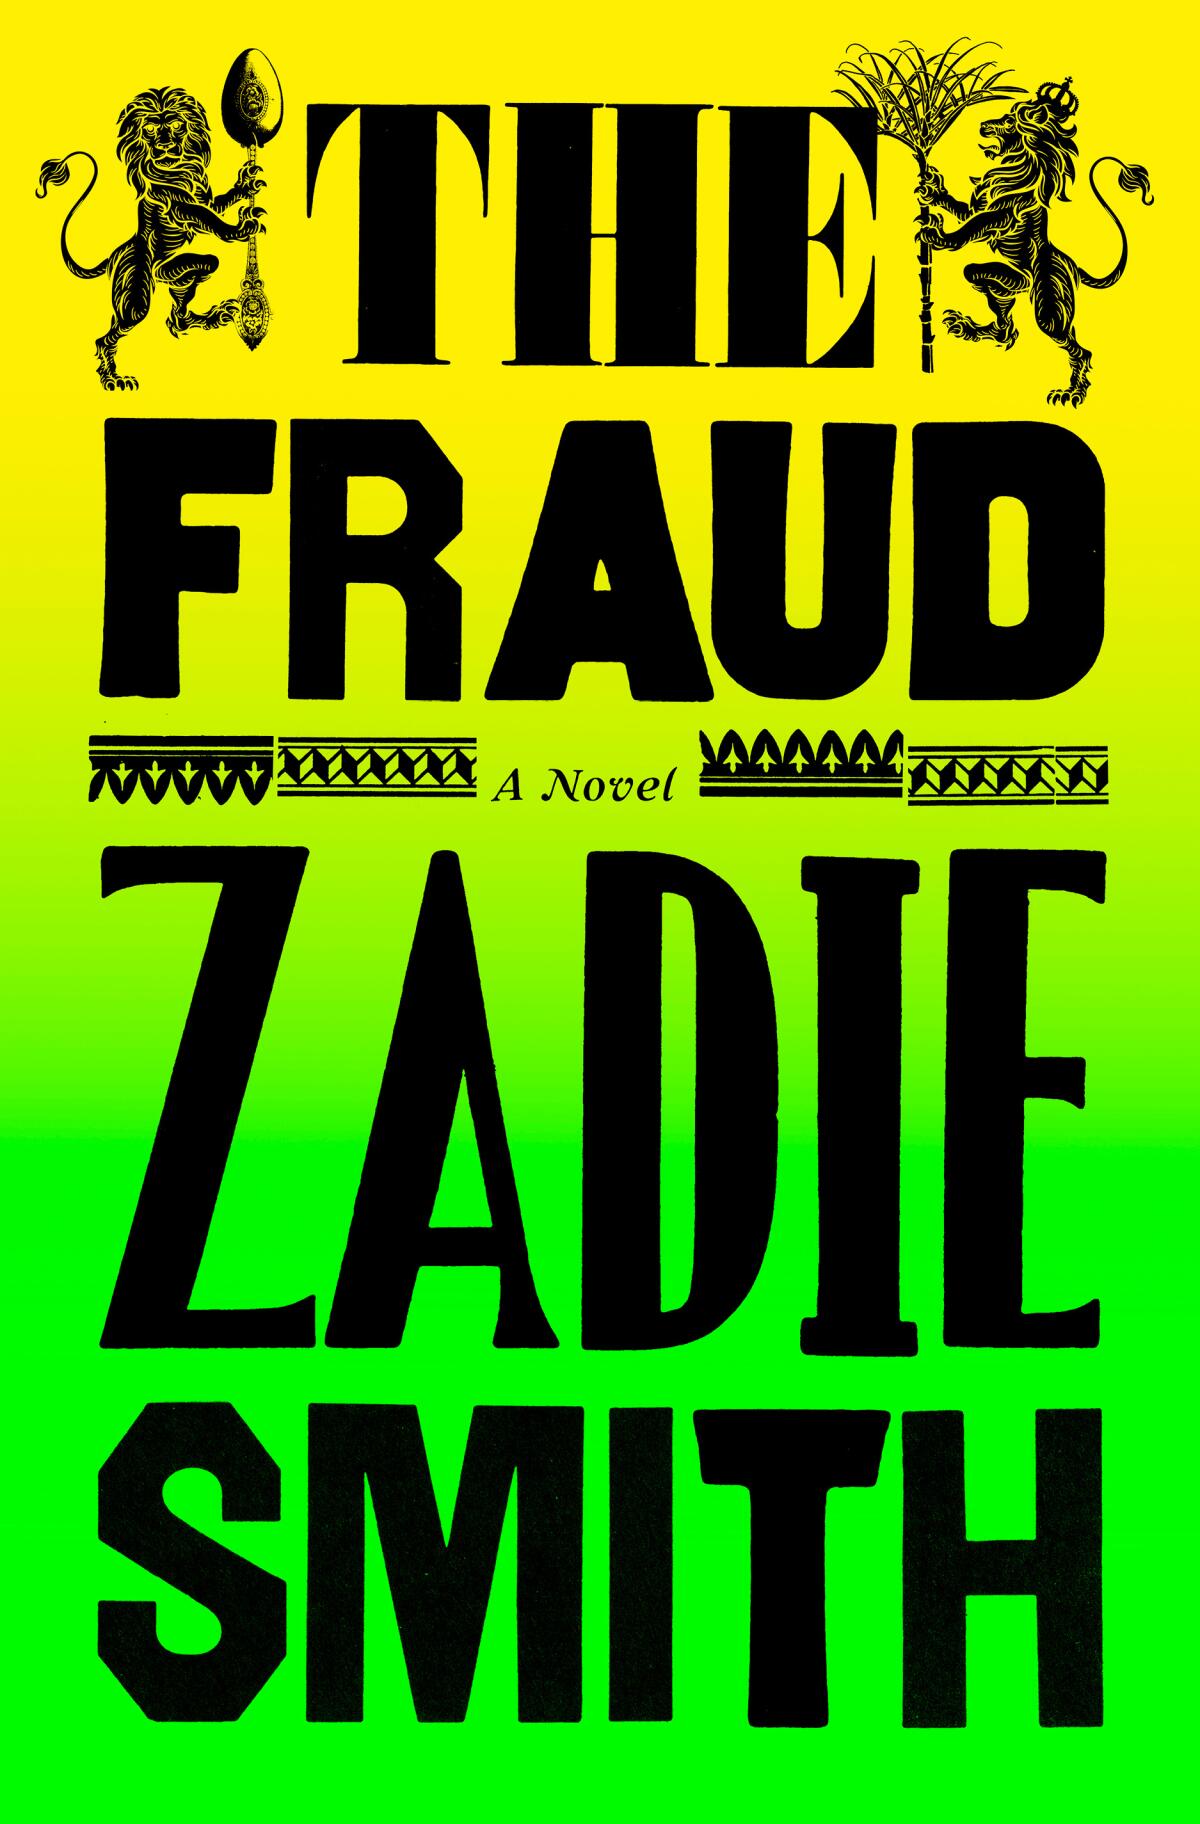 The cover of "The Fraud" by Zadie Smith, featuring bright yellow turning into neon green.